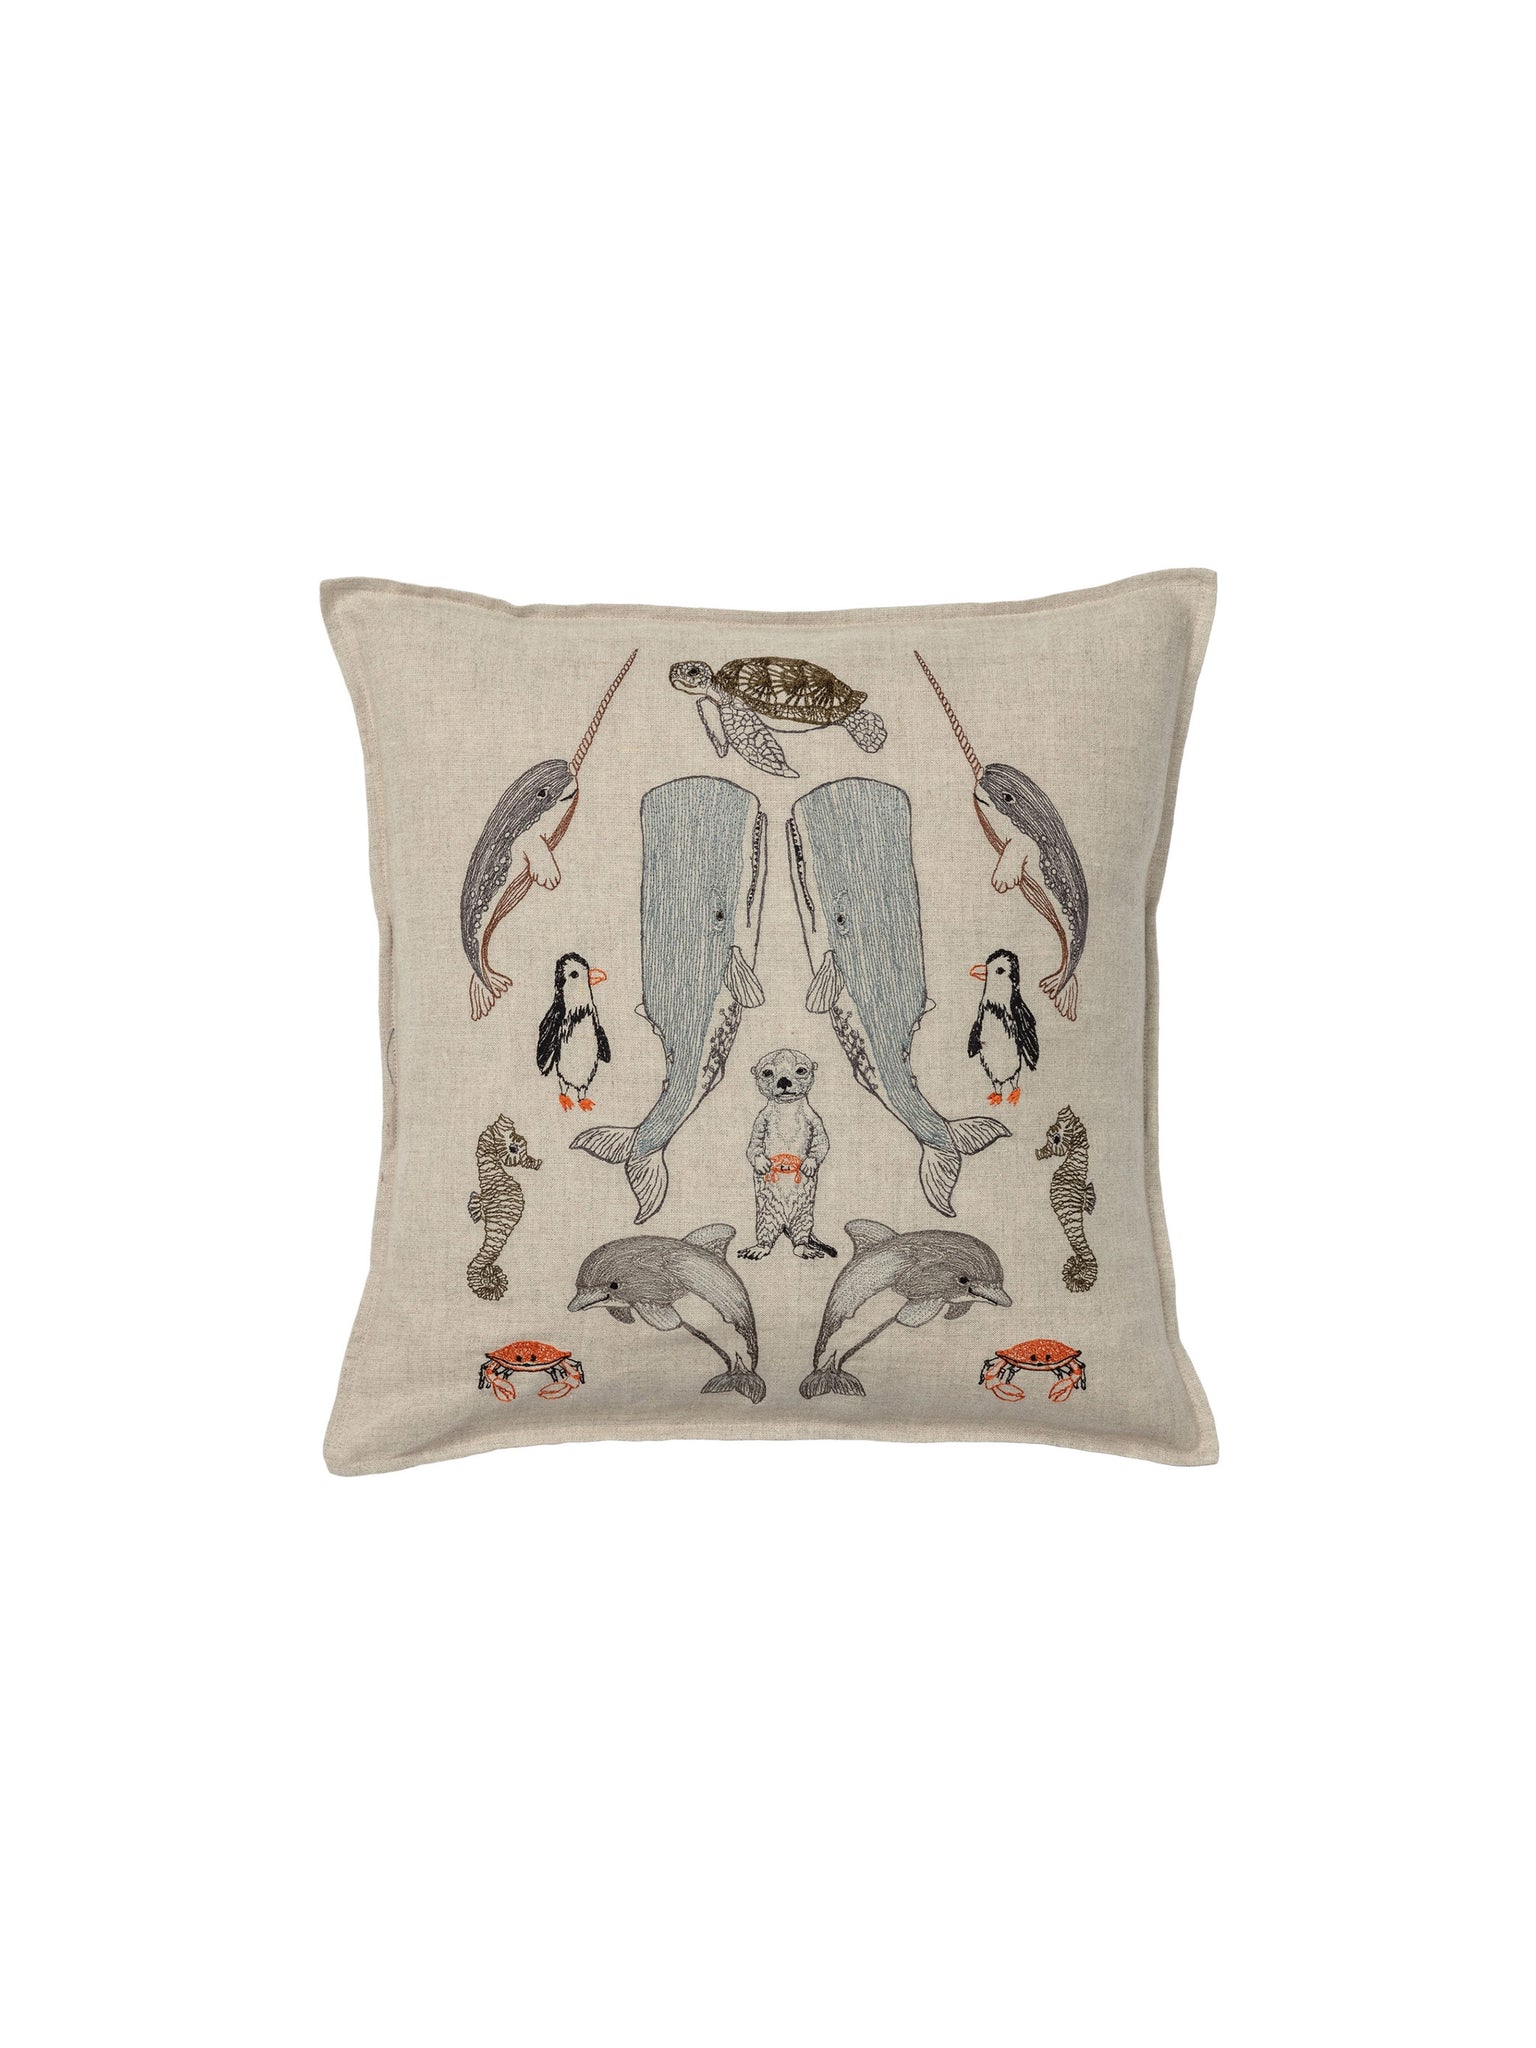 Coral & Tusk Sea Friends Pillow Weston Table